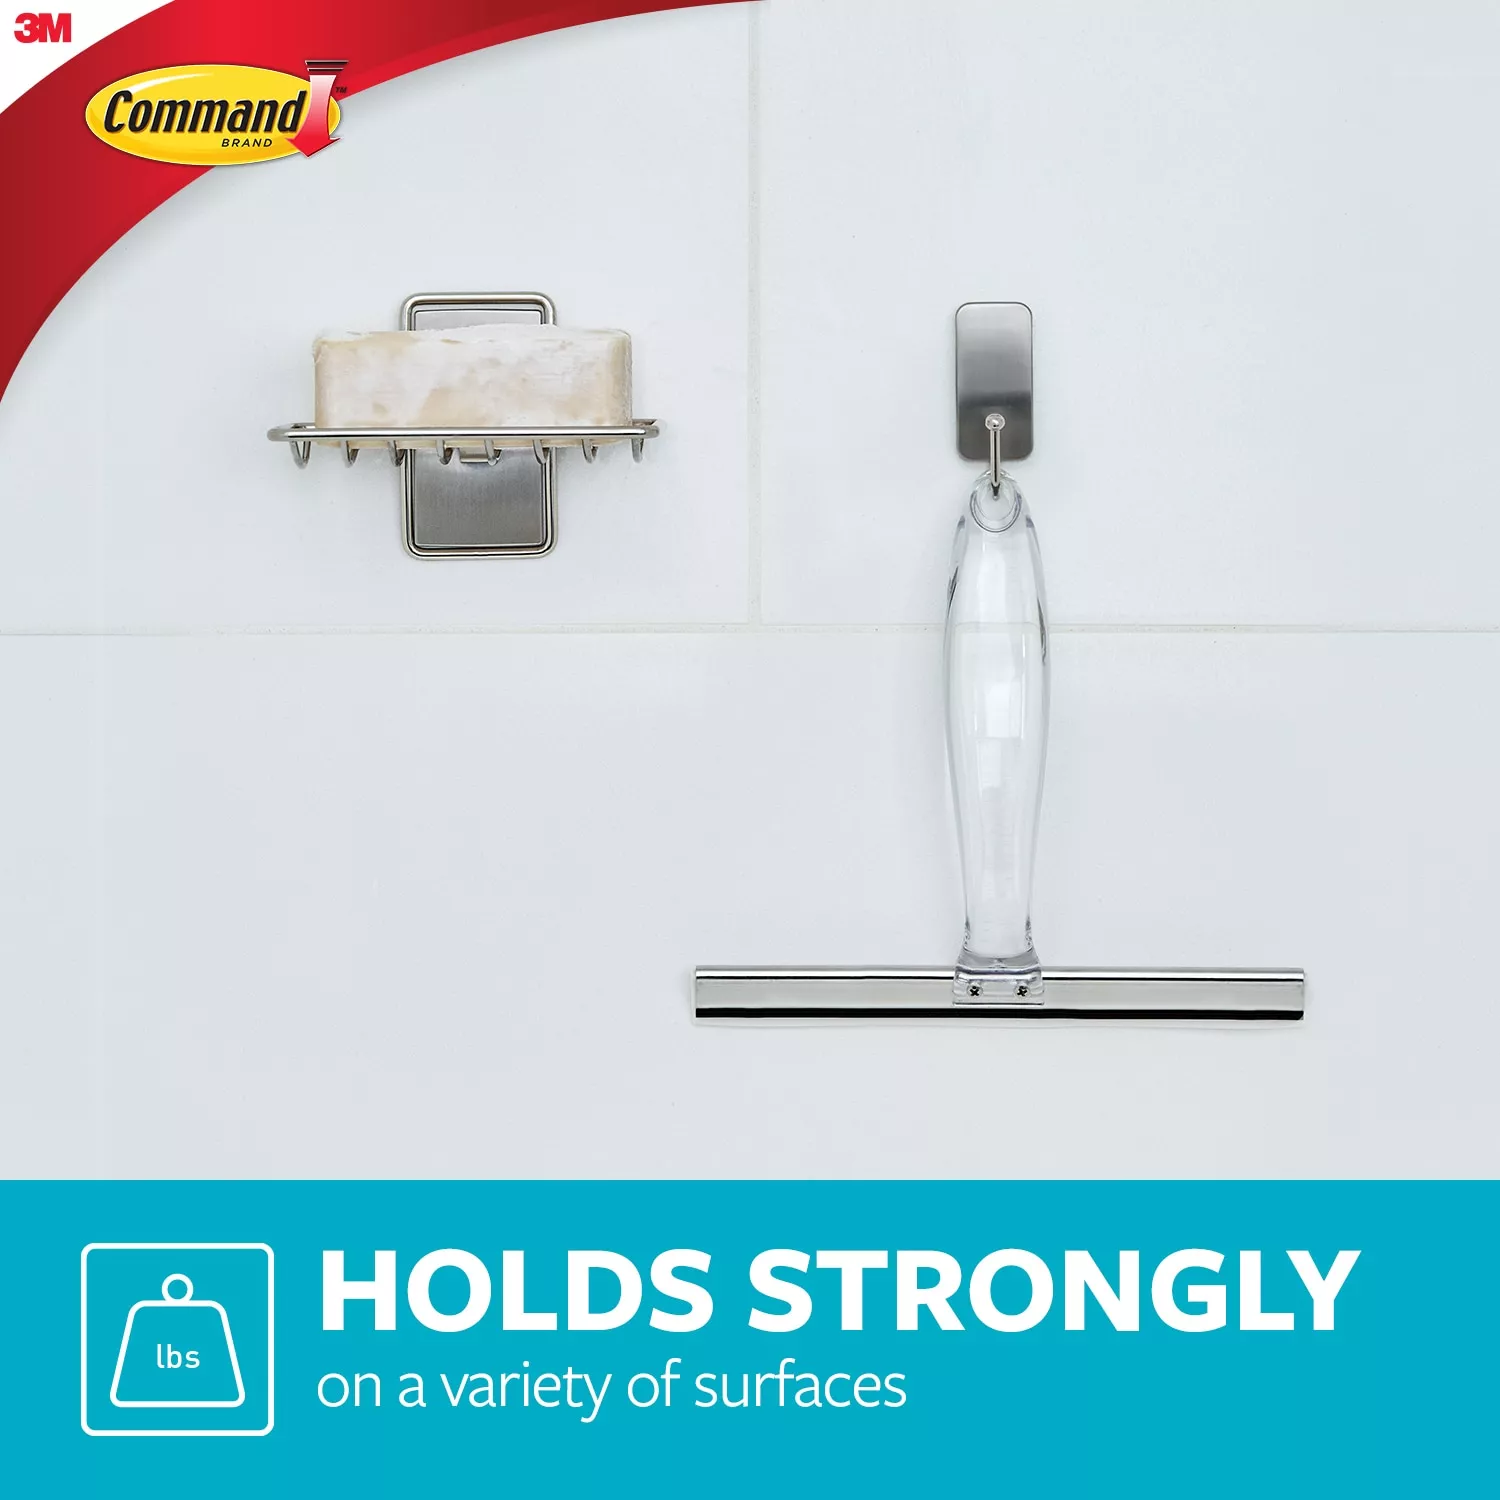 SKU 7100085085 | Command™ Bath Squeegee and Hook Stainless Steel and Satin Nickel